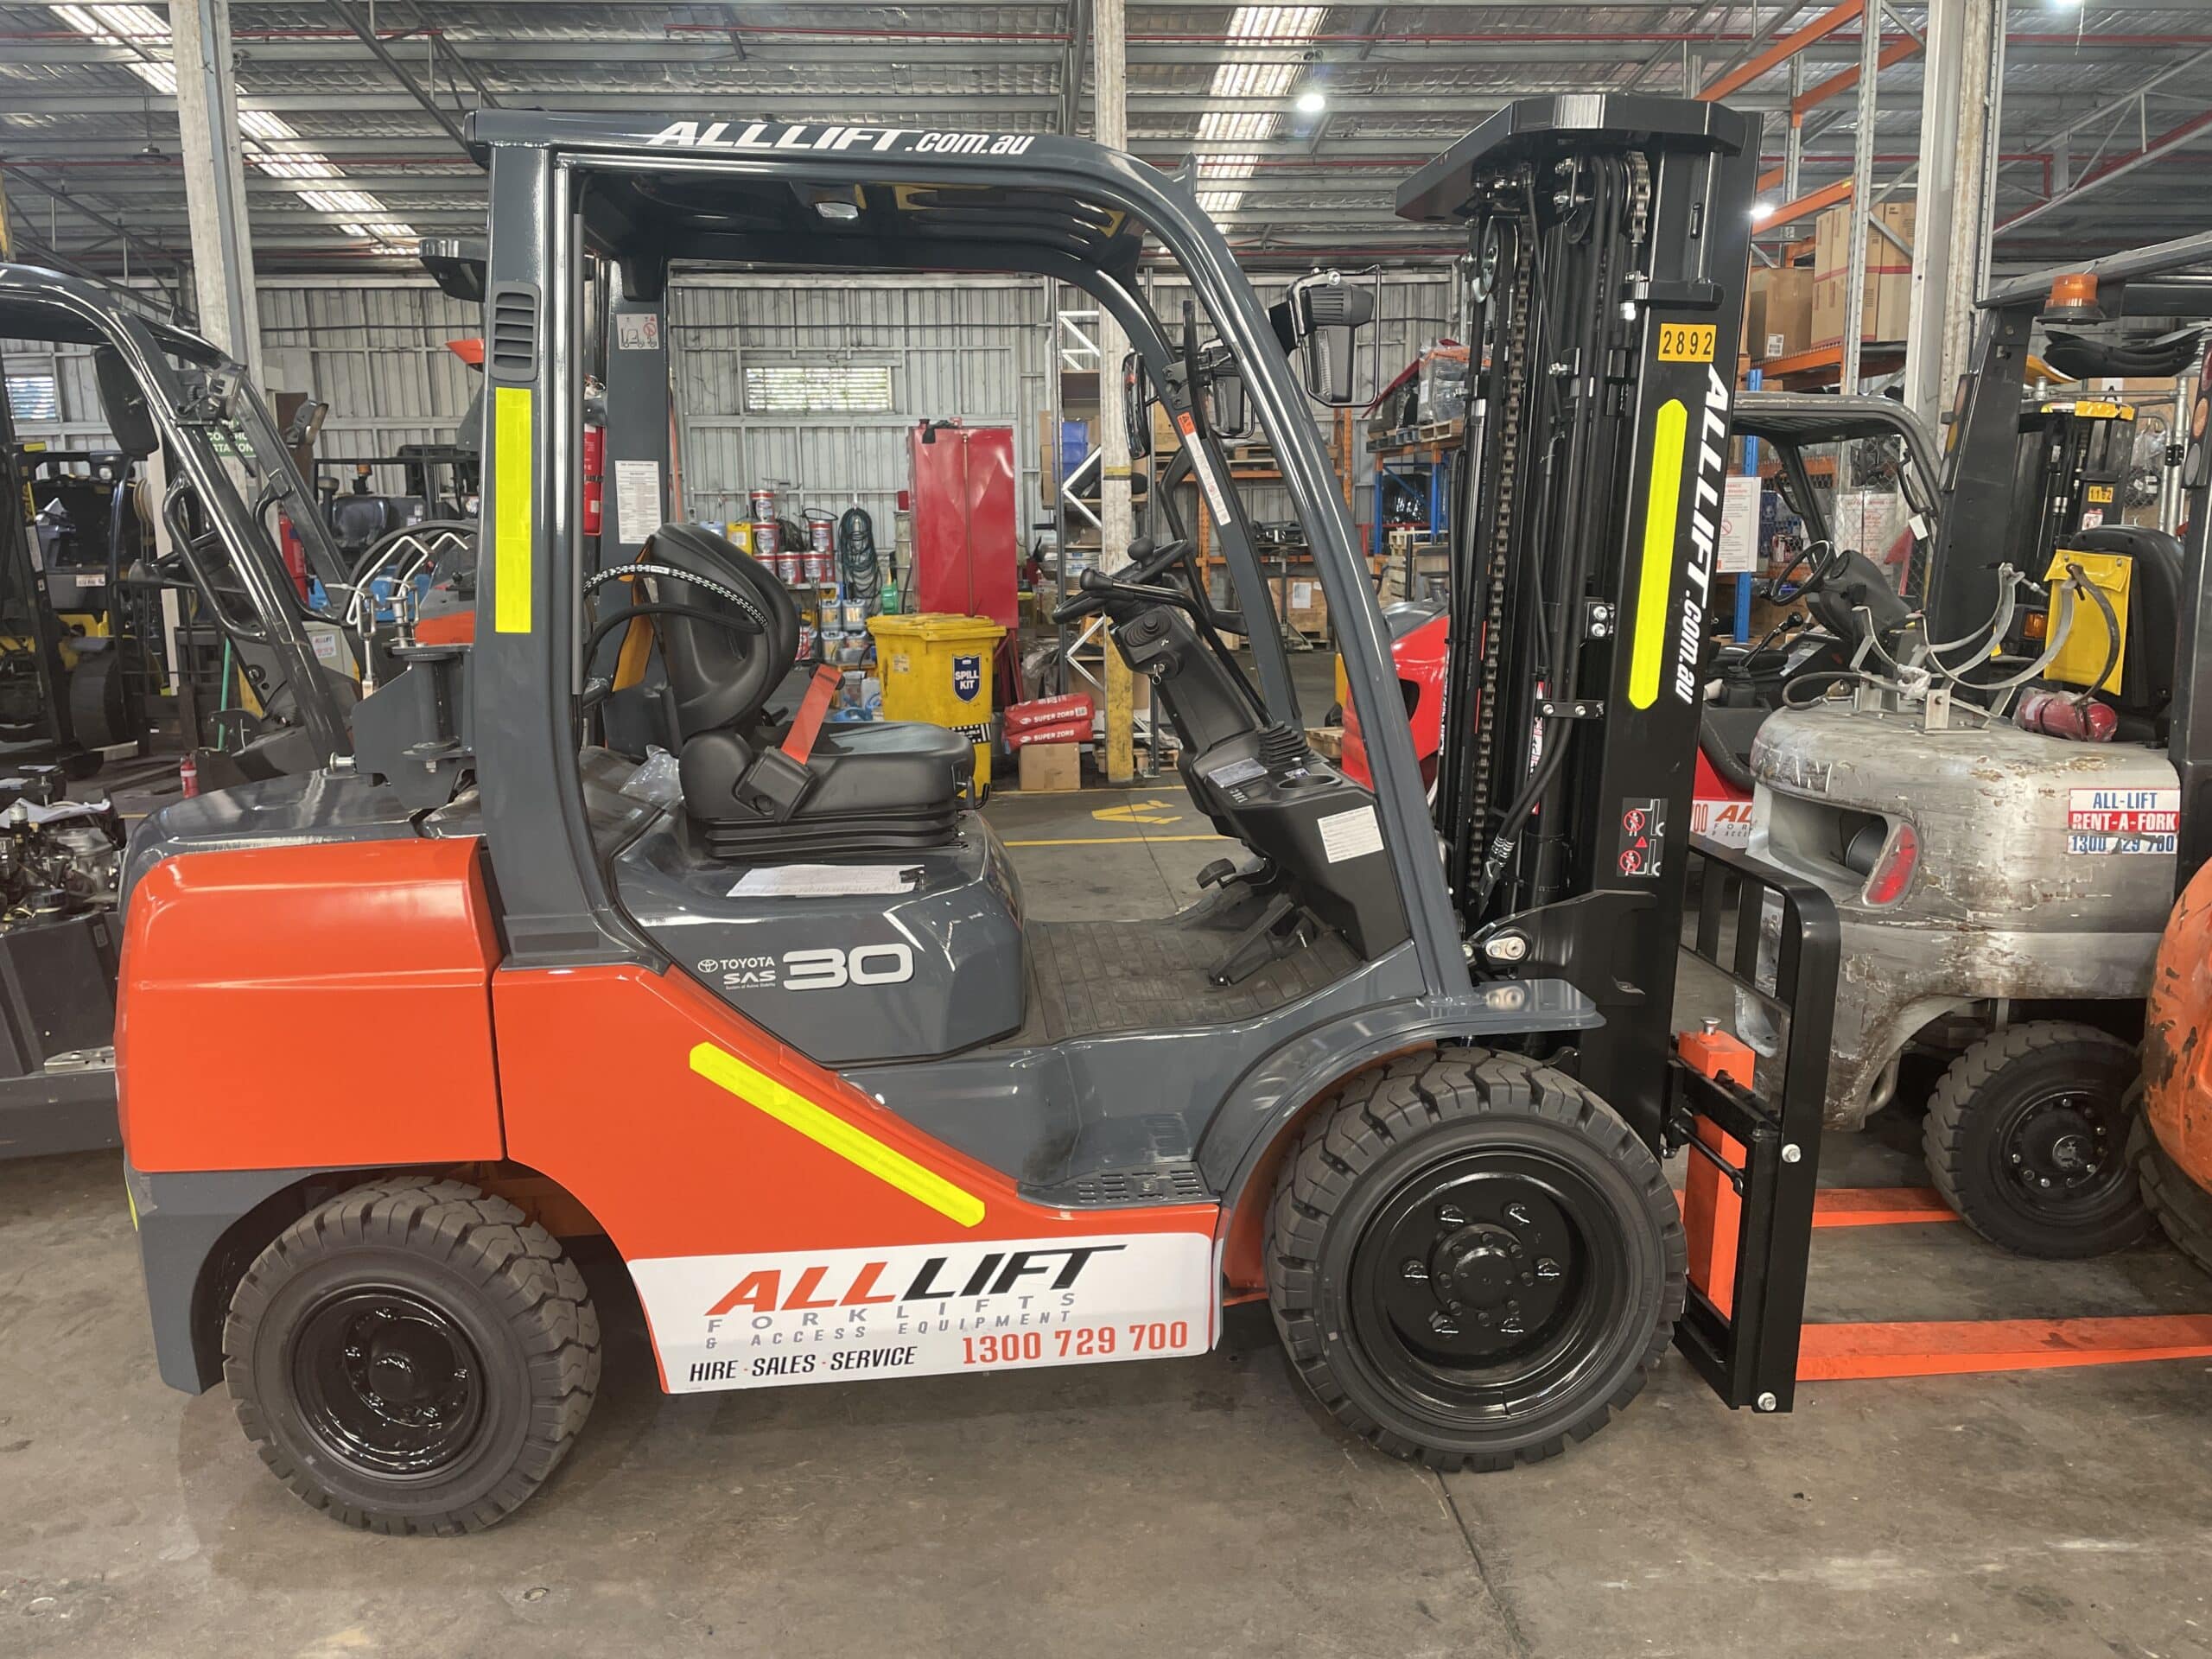 Forklift fitted with a Teletrack GPS tracker and pre-start kit.